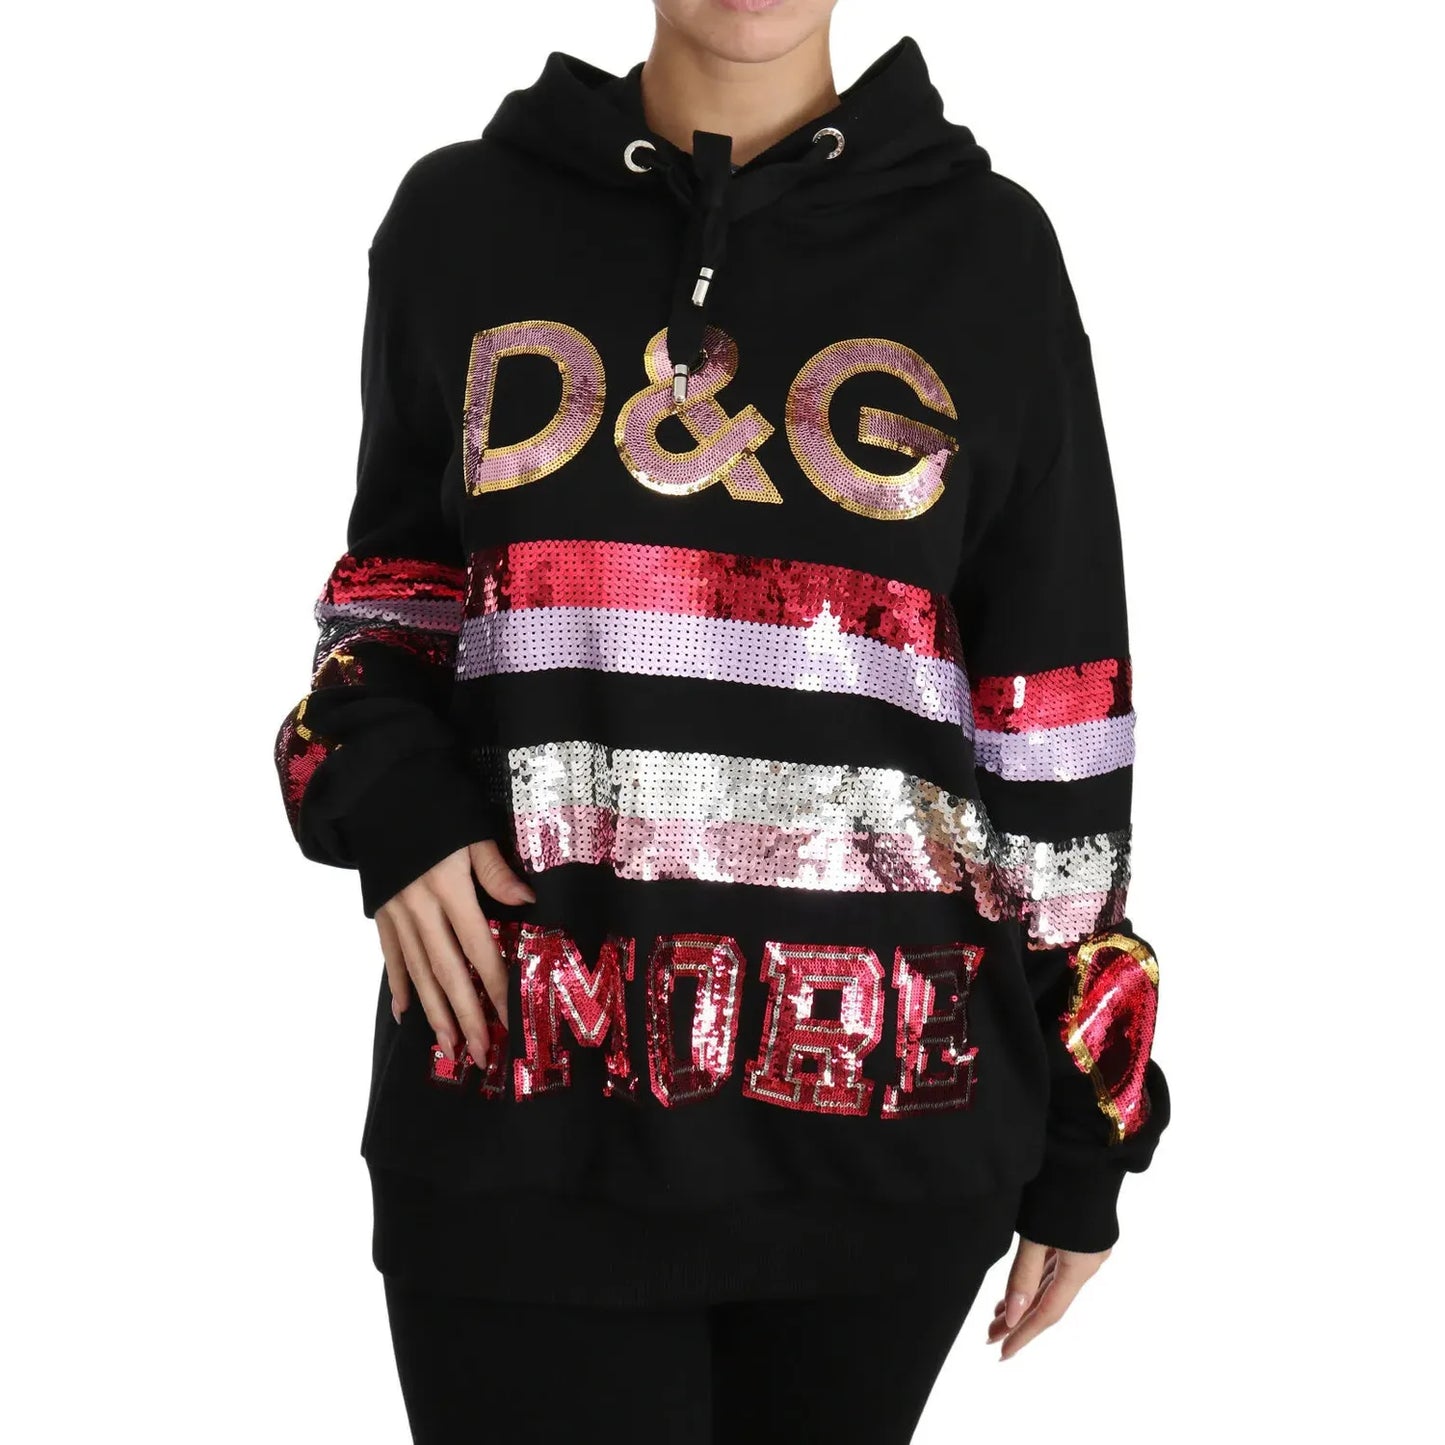 Dolce & Gabbana DG Sequined Hooded Pullover Sweater dg-sequined-hooded-pullover-sweater-4